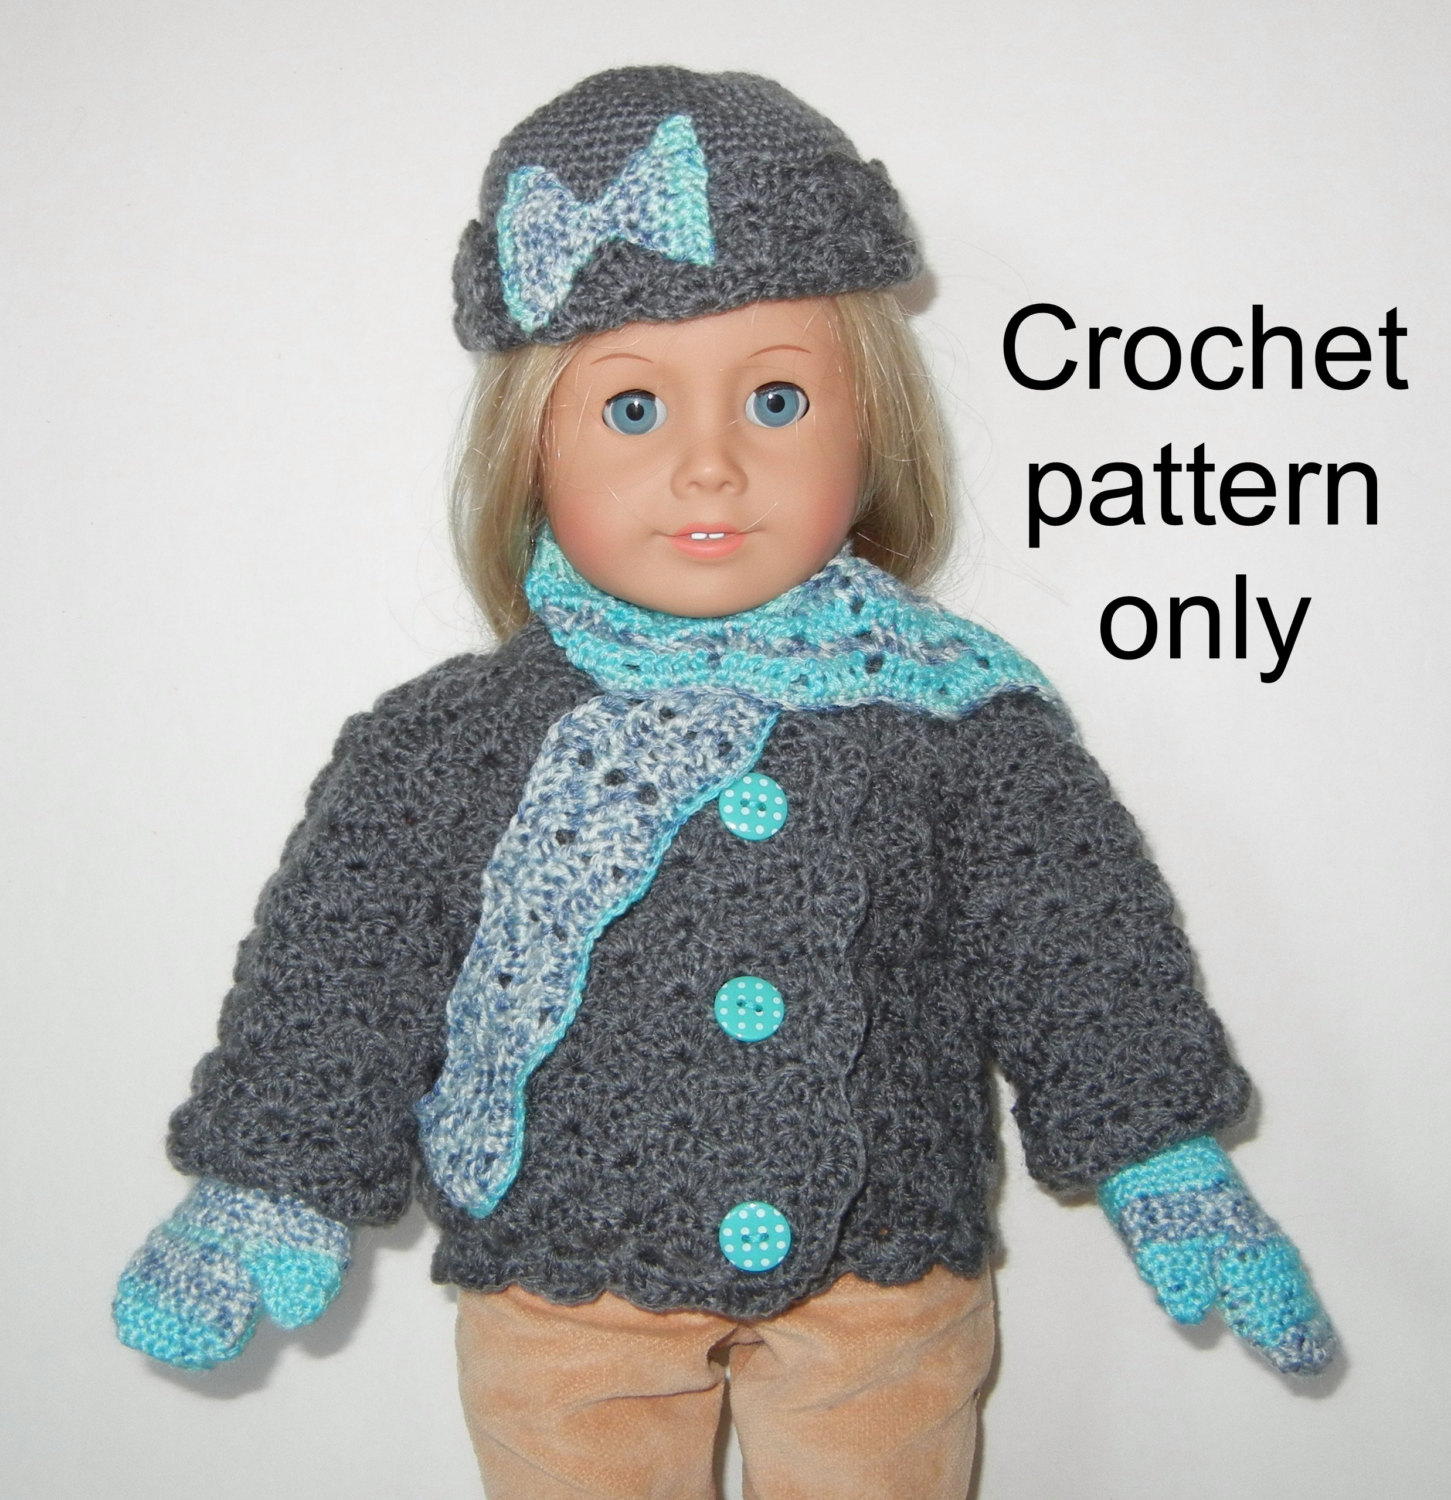 How to Crochet a Cardigan for a Stuffed Animal